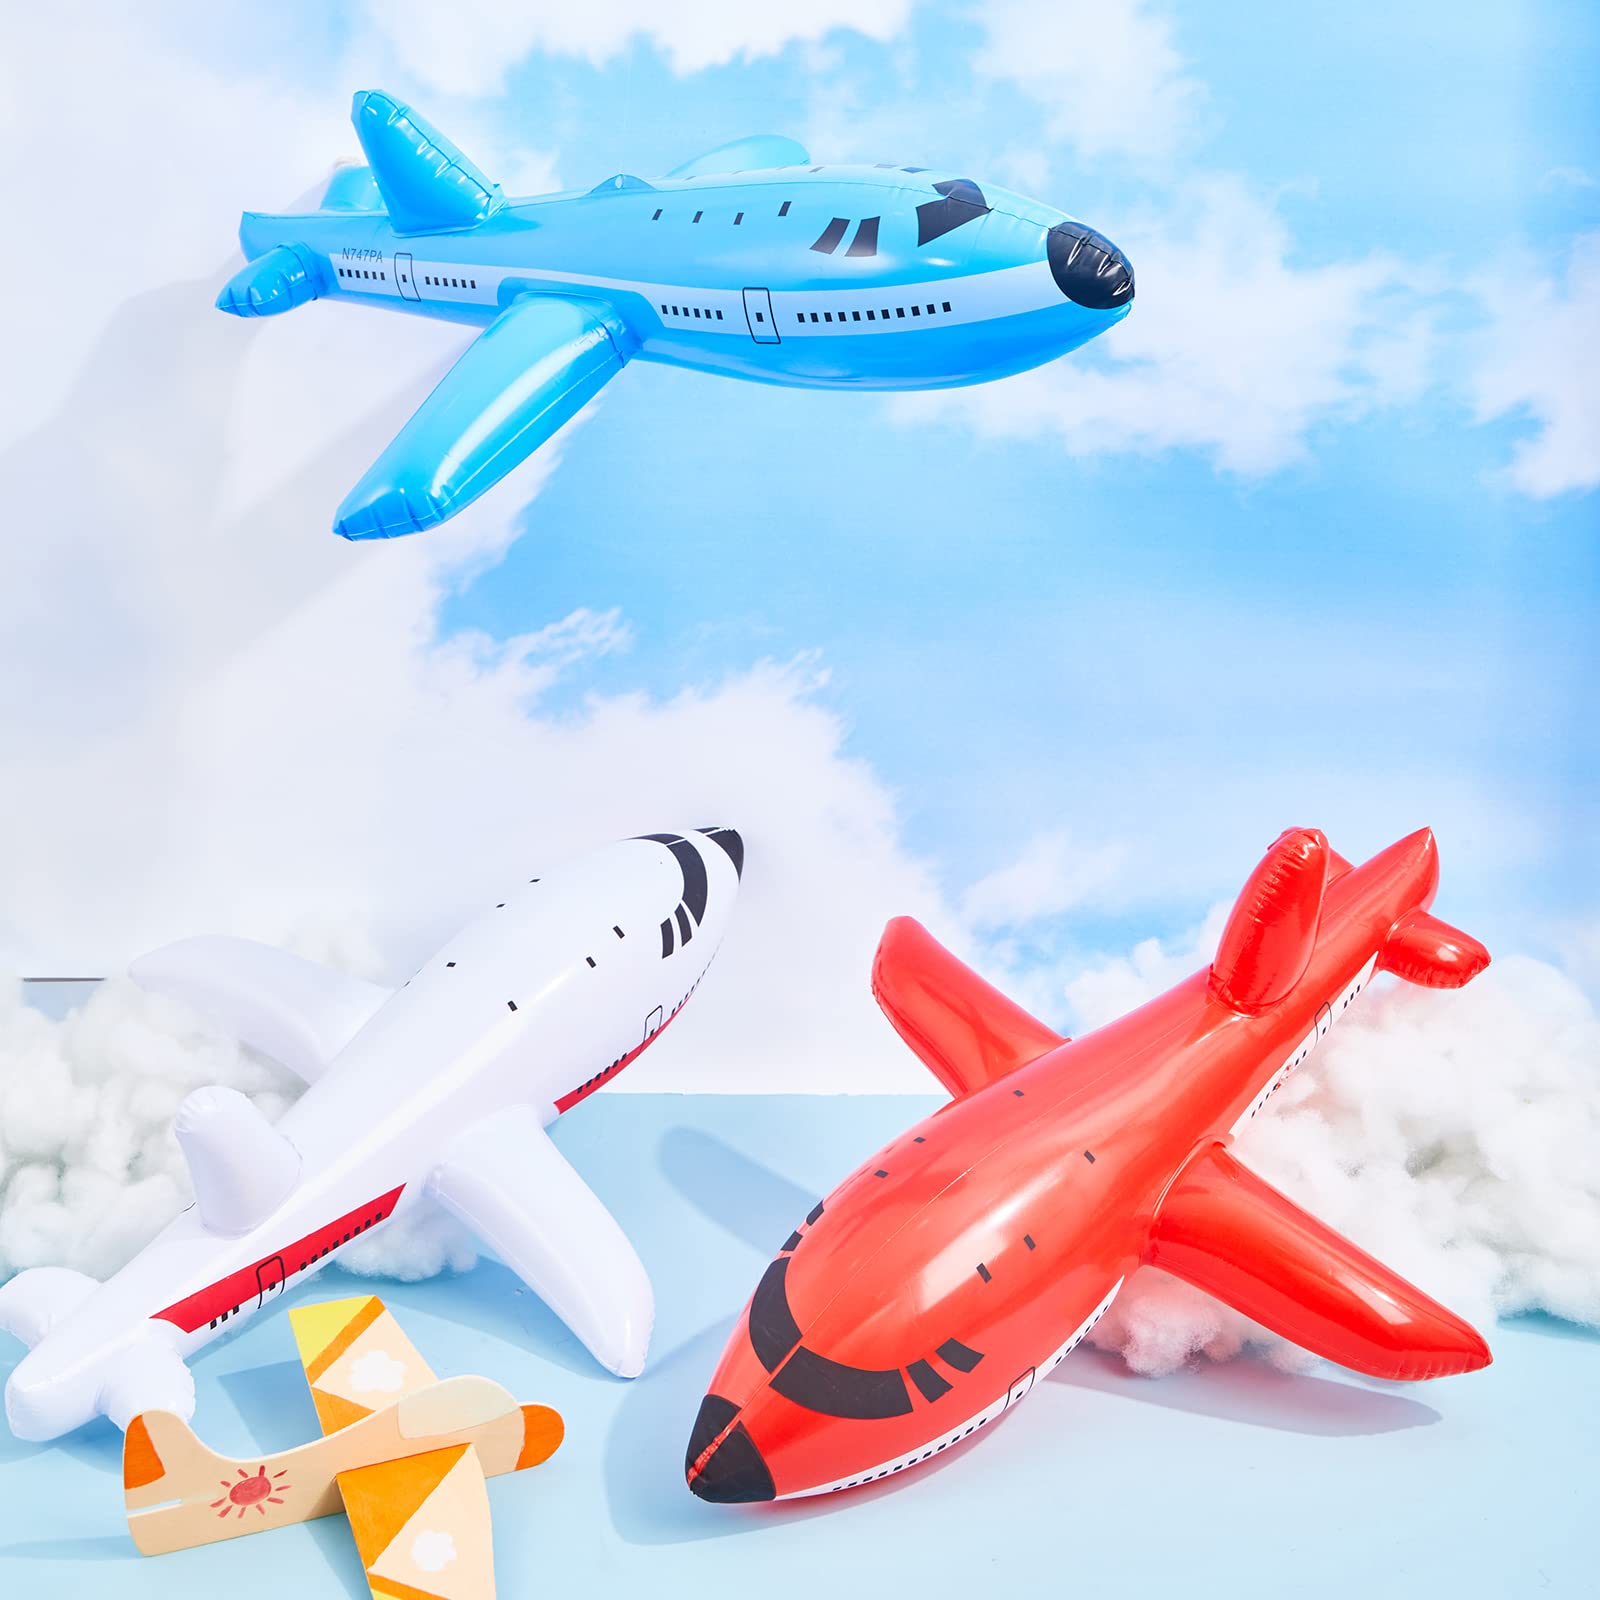 6 Pieces Inflatable Airplanes Aircraft Inflates Plane Inflated Toys for Kids Birthday Shower Party Decoration Supplies (Large)